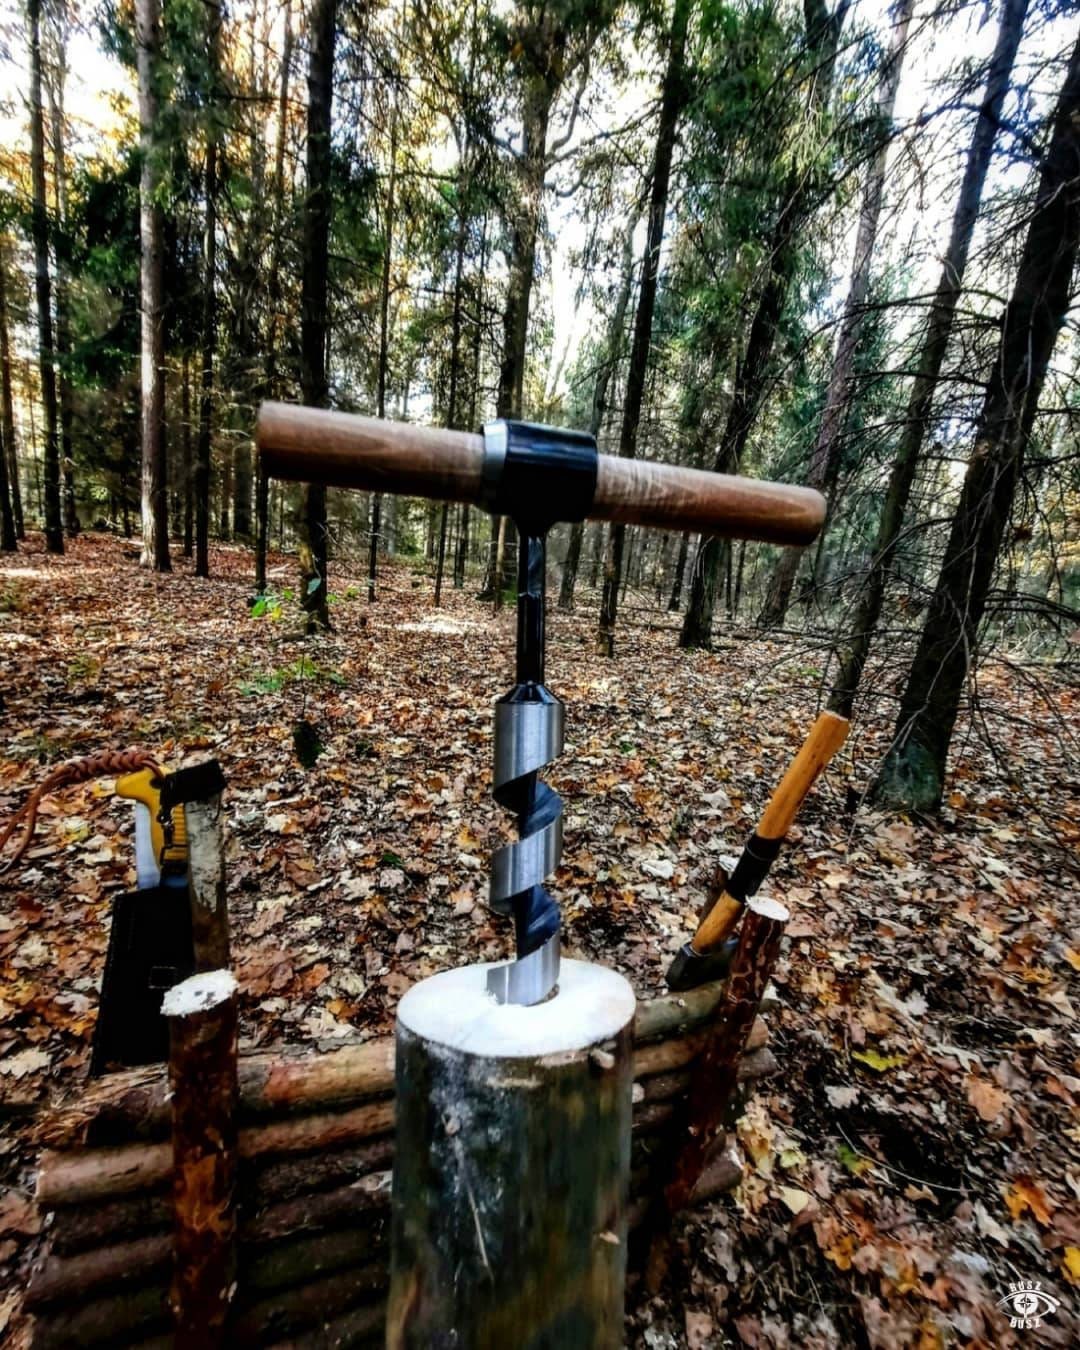 HNONPW Bushcraft Gear for Survival Settlers Bushscraft Hand Auger Wrench with Flint Scotch Eye Wood Drill Peg and Manual Hole Maker Mul